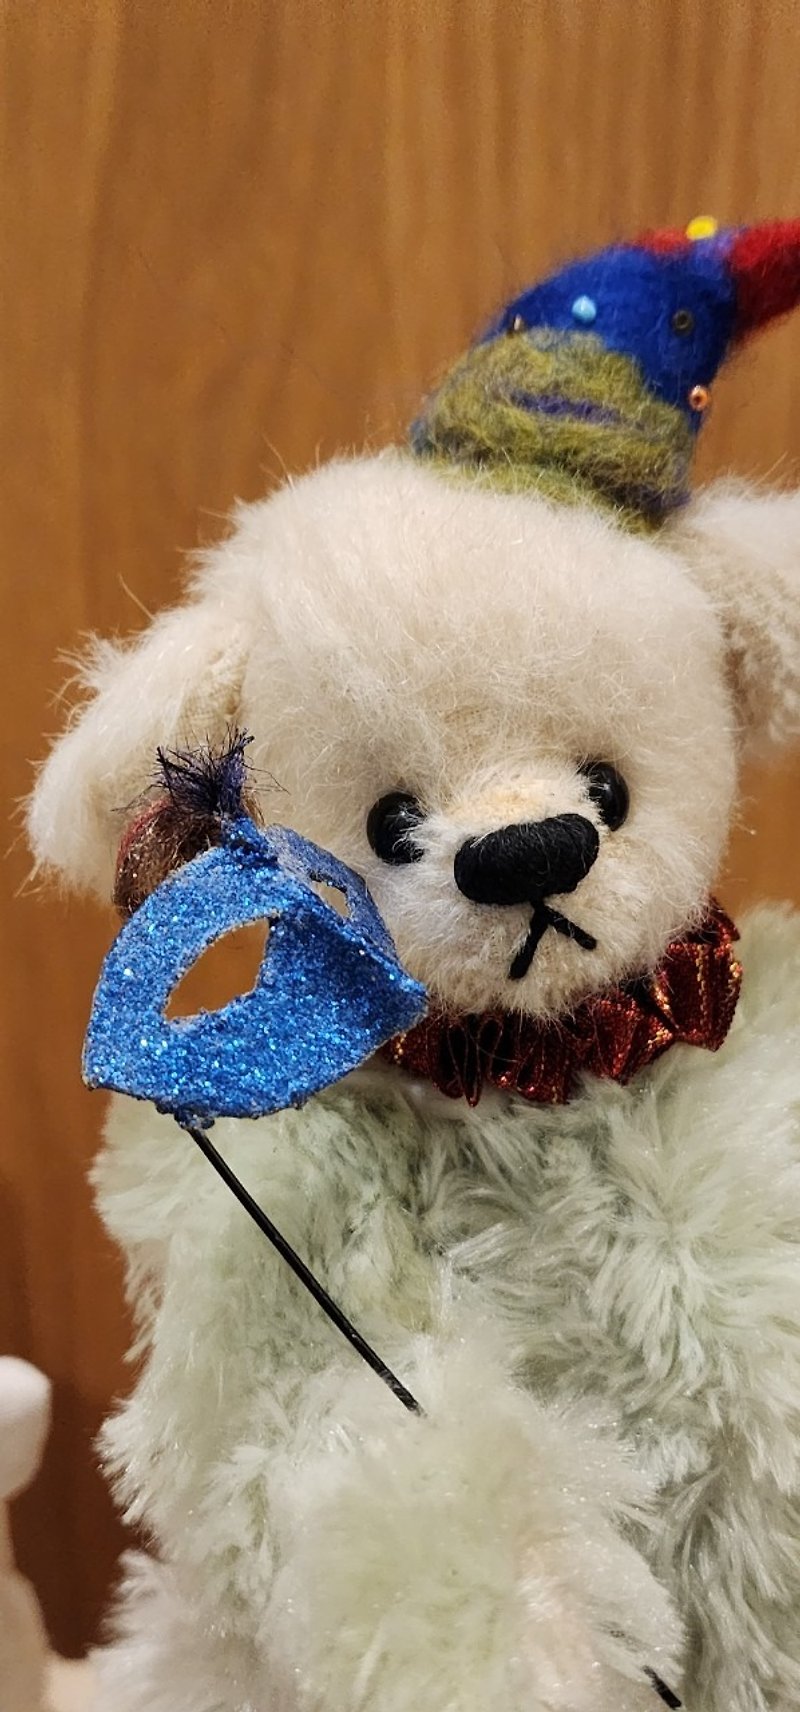 Venice Carnival  TEDDY BEAR  HANDMADE - Knitting, Embroidery, Felted Wool & Sewing - Wool 